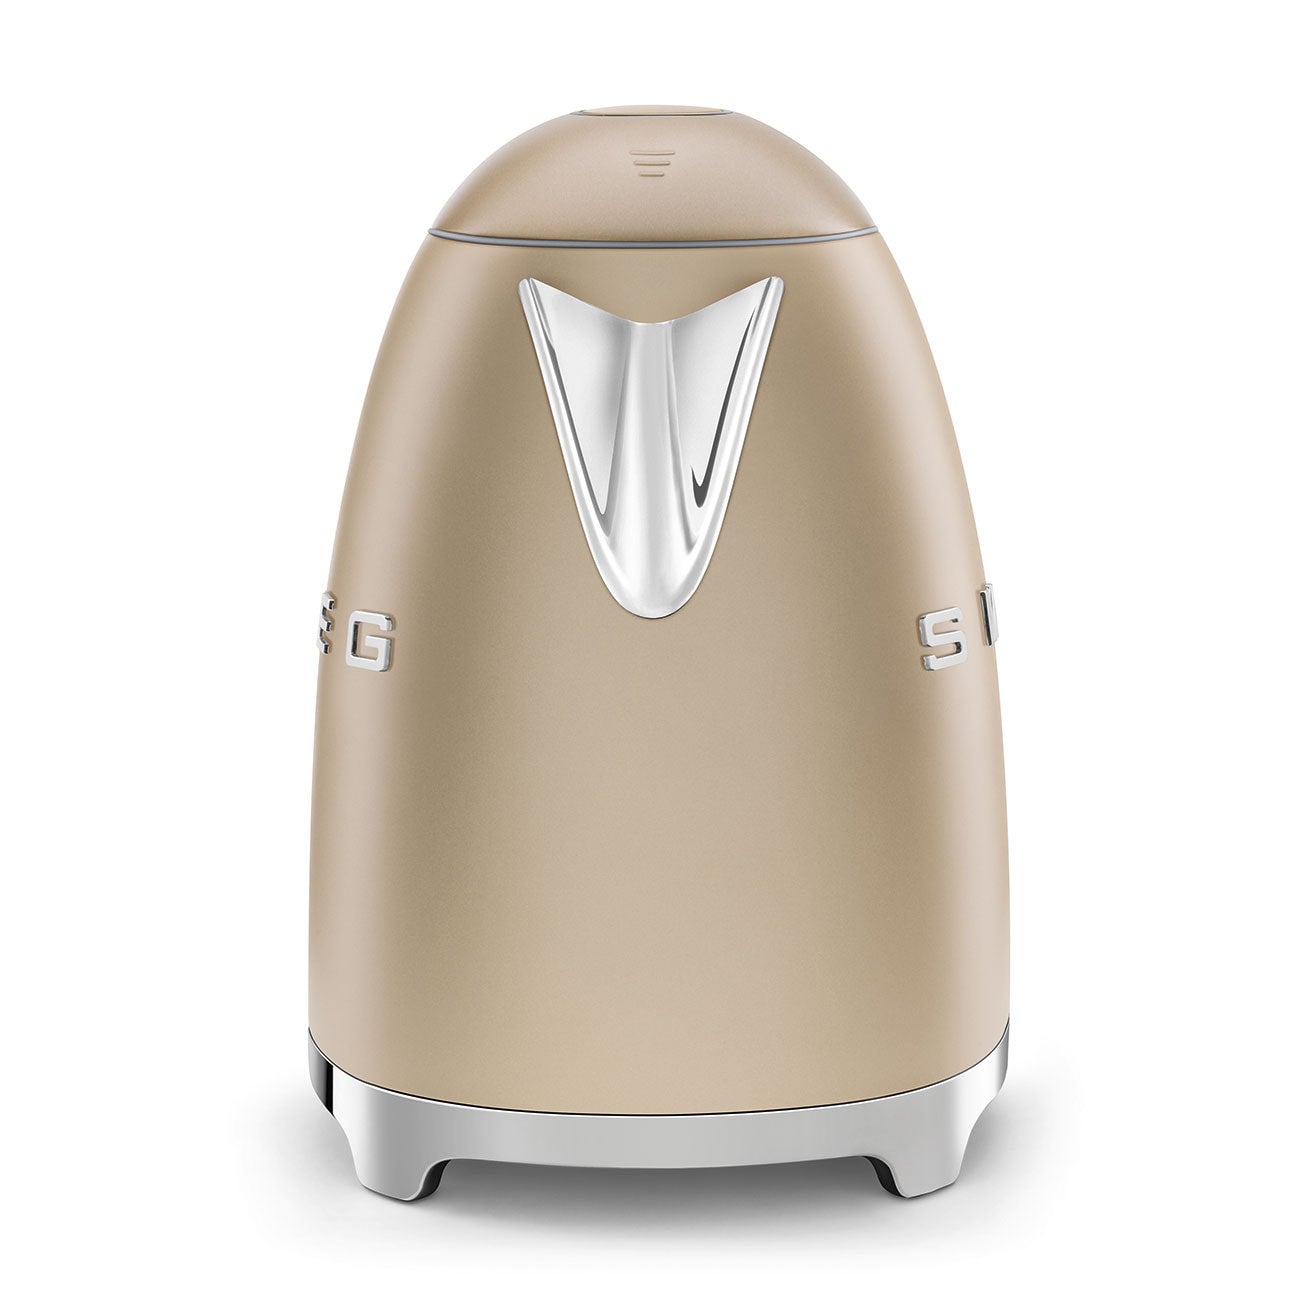 SMEG serves up style with new matte finish retro-style kettle and toaster –  The Luxe Review